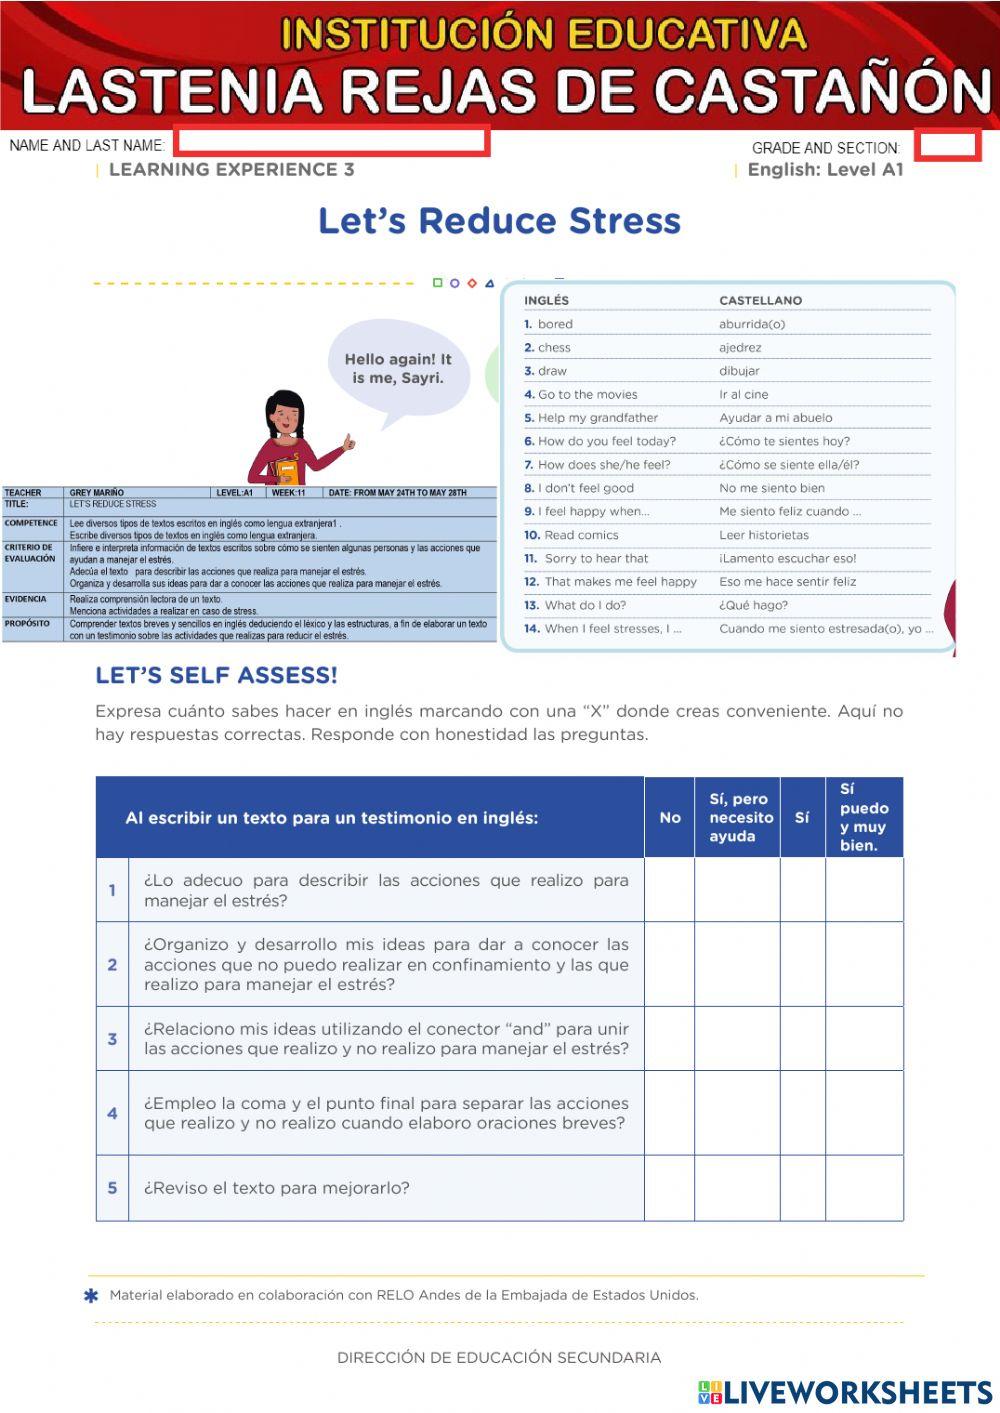 challege 1 - let's reduce stress  02 